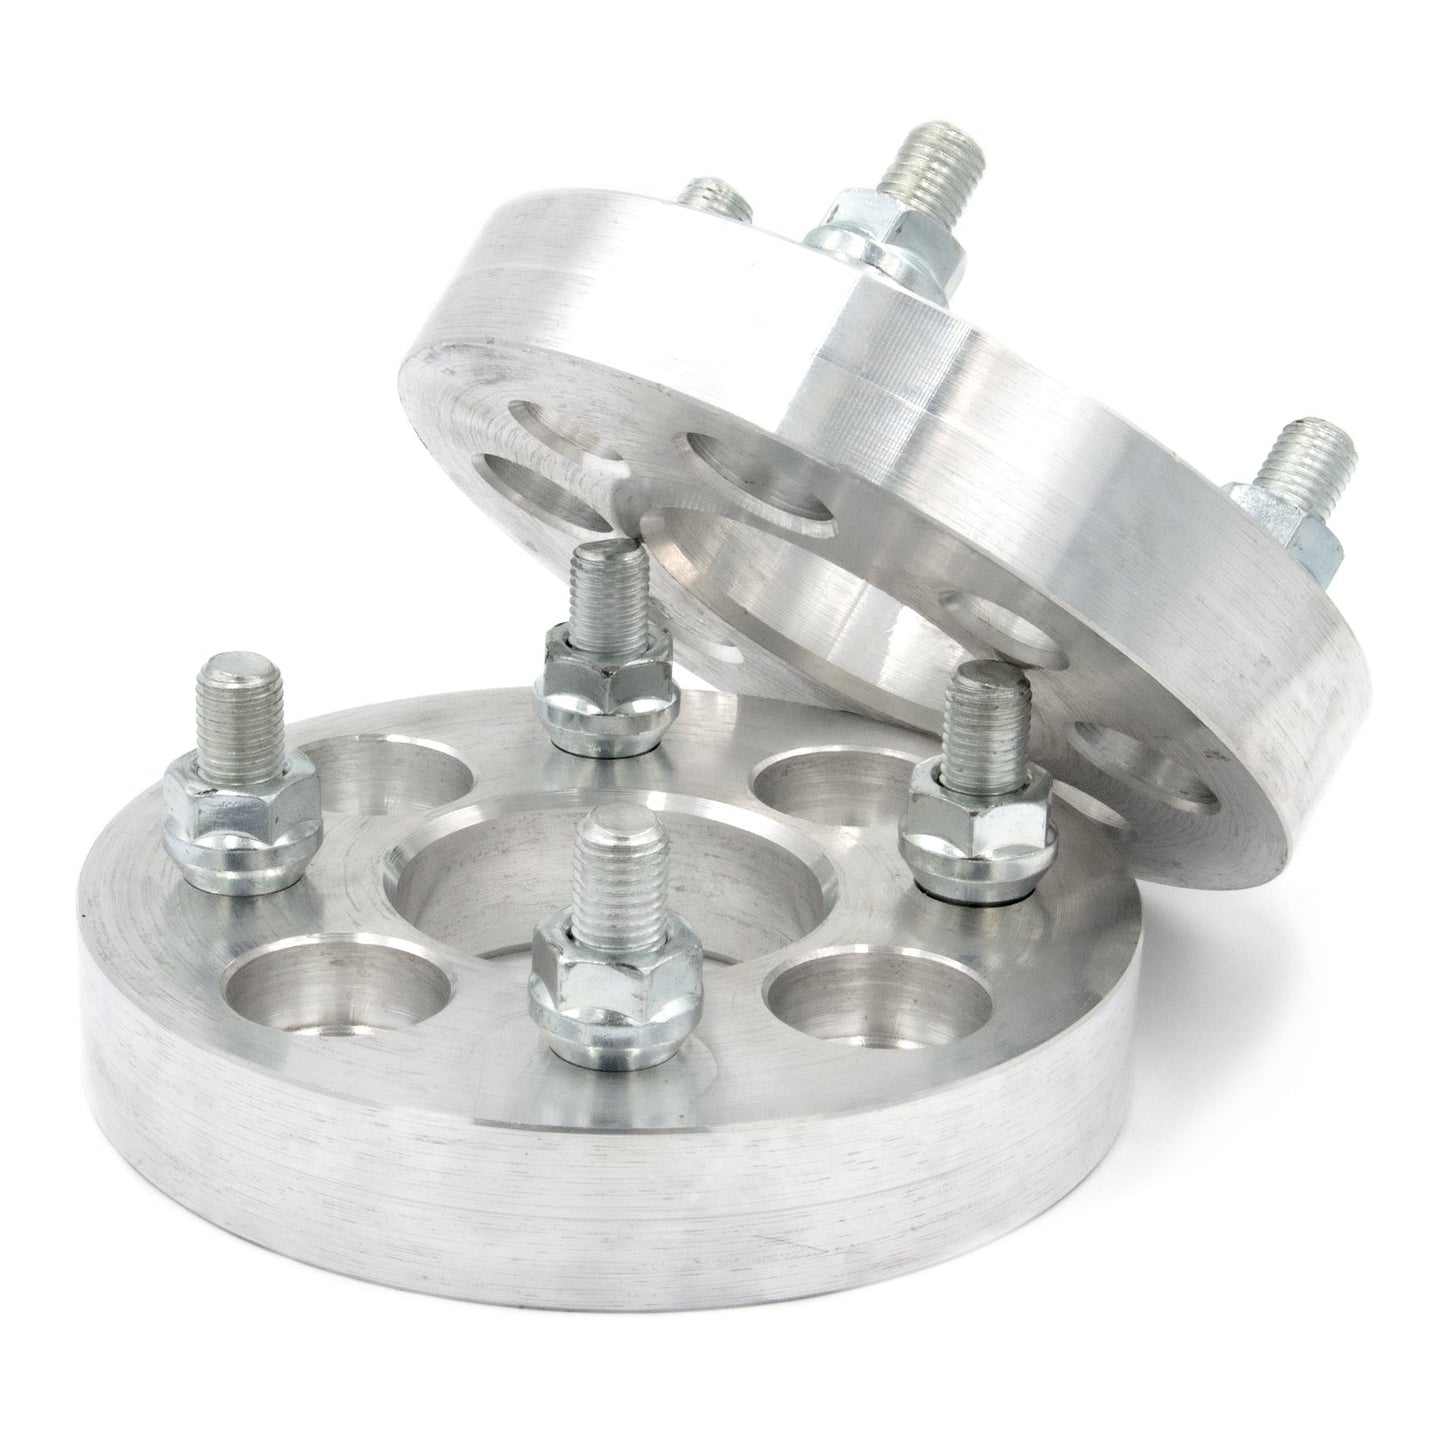 4x4.5" to 4x4.25" Wheel Spacer/Adapter - Thickness: 3/4"- 4"